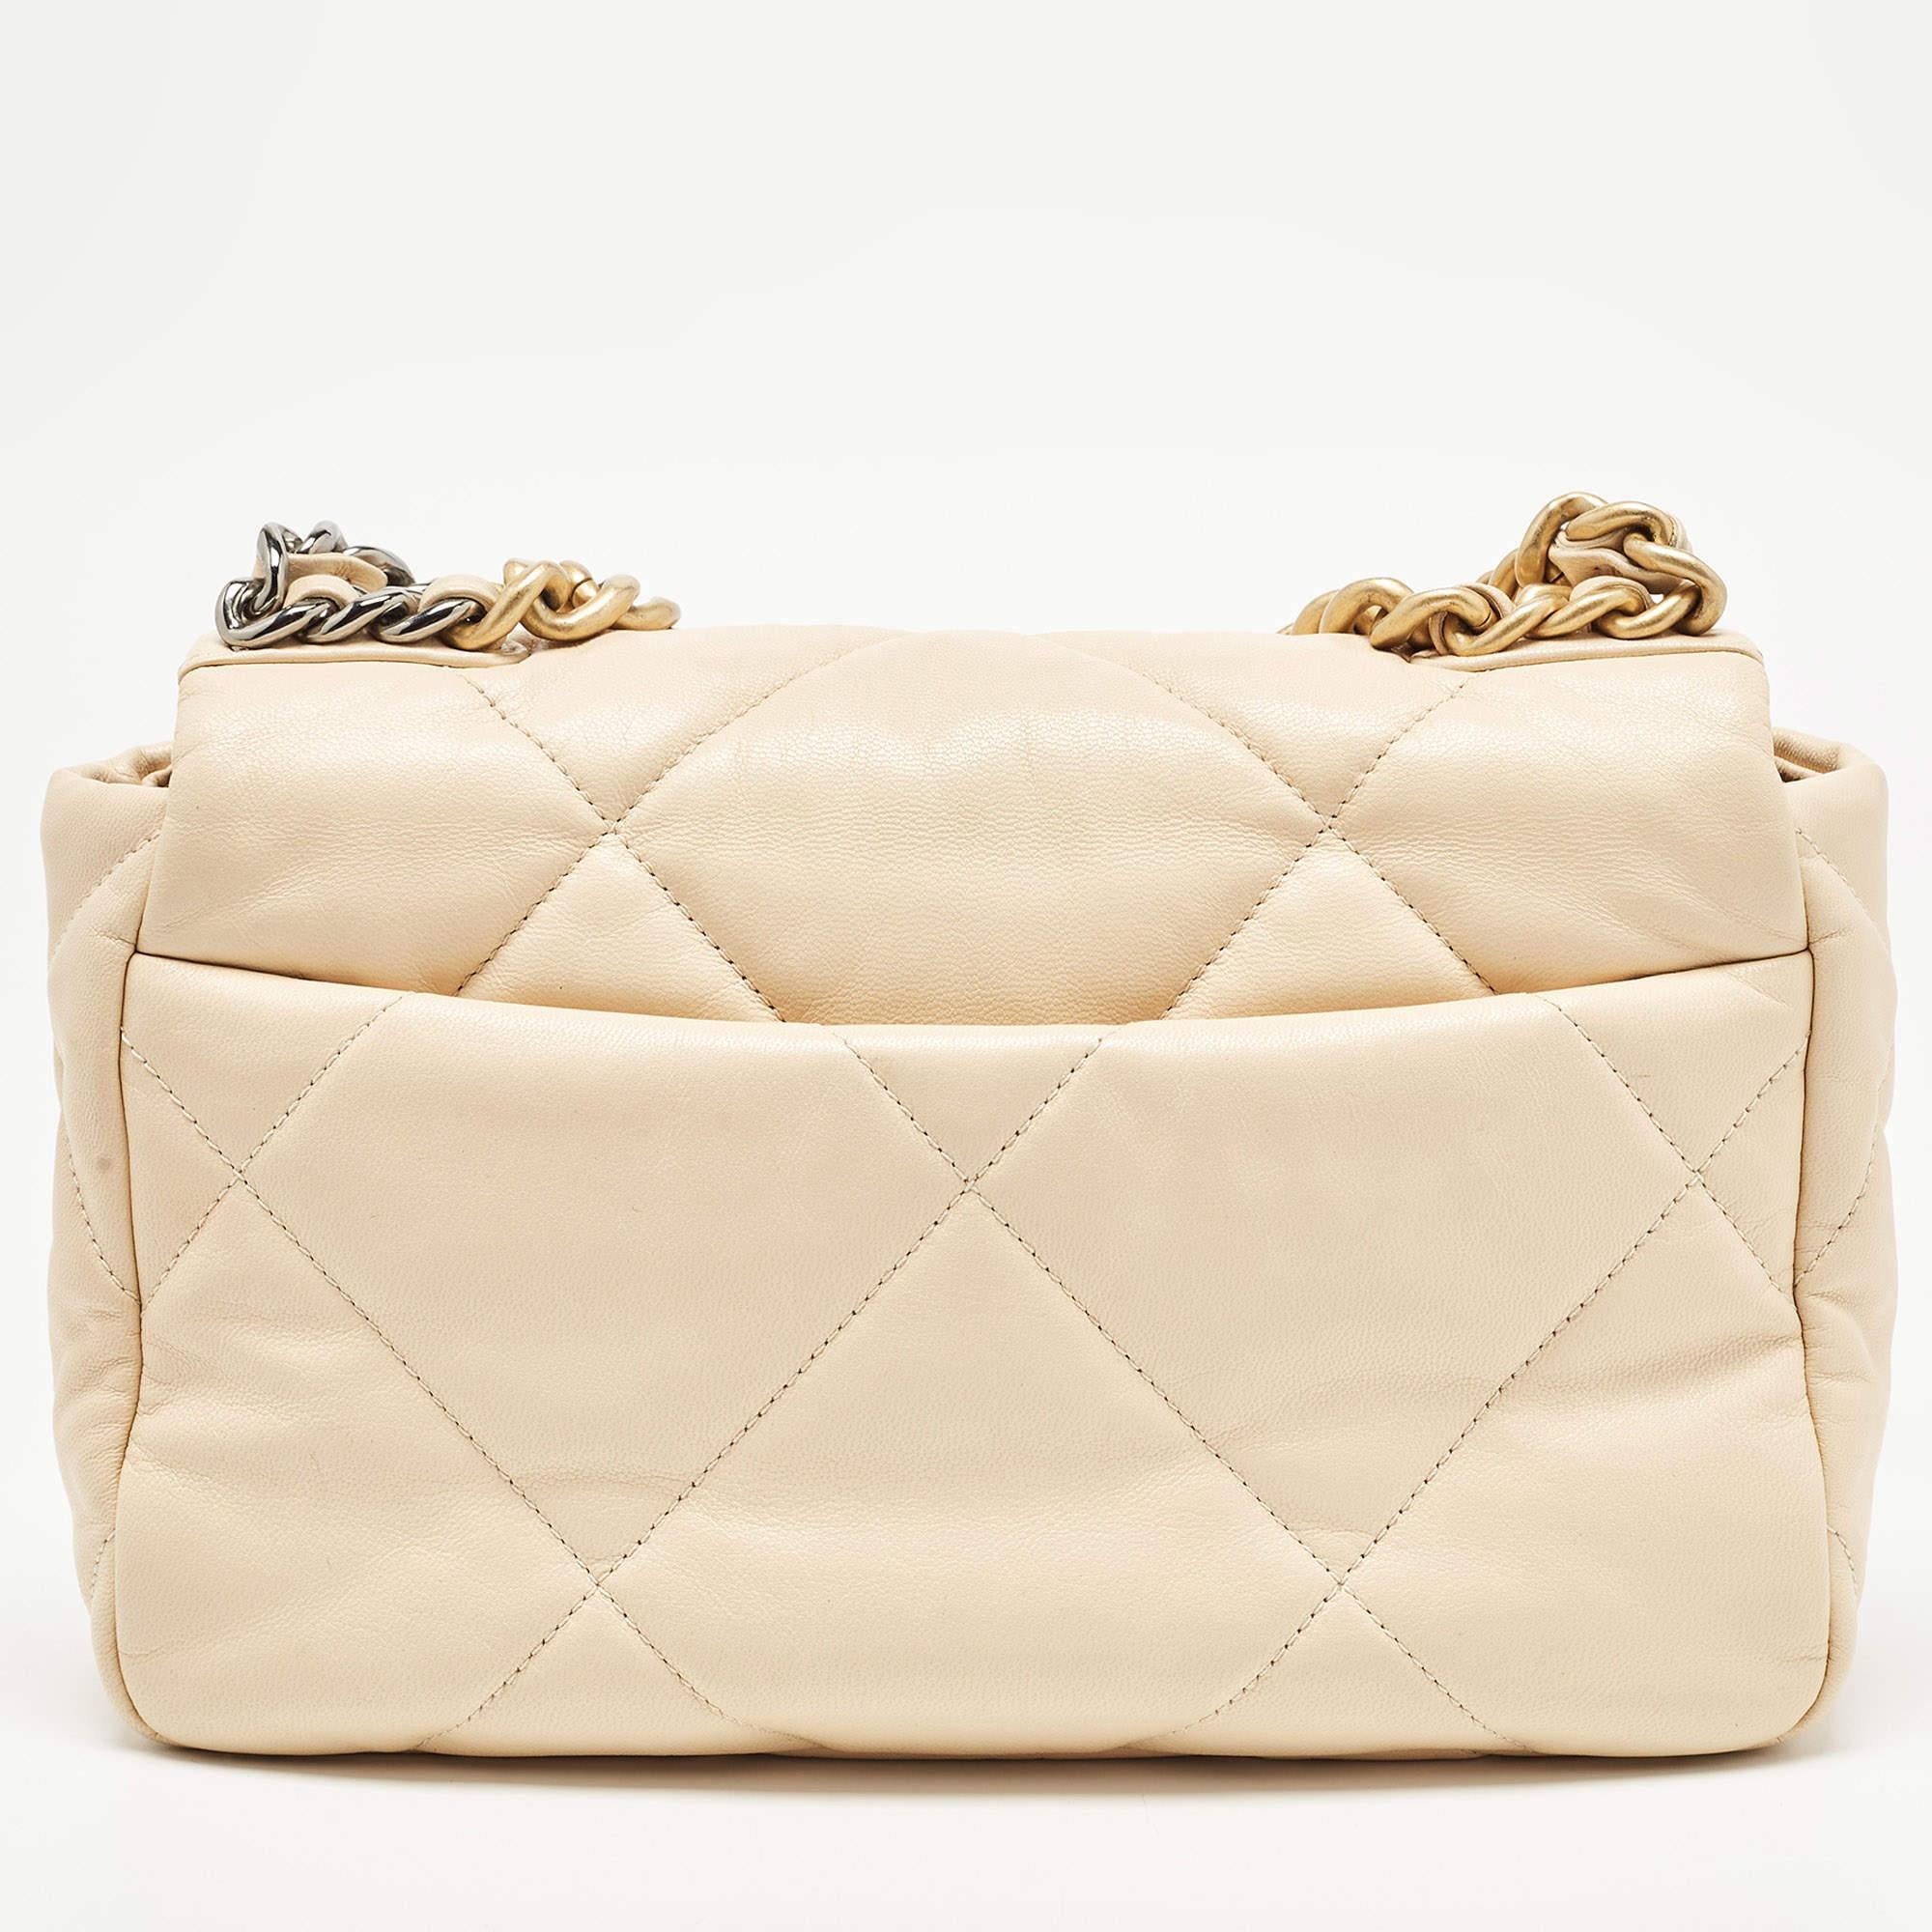 Chanel Beige Quilted Leather Medium 19 Flap Bag 11